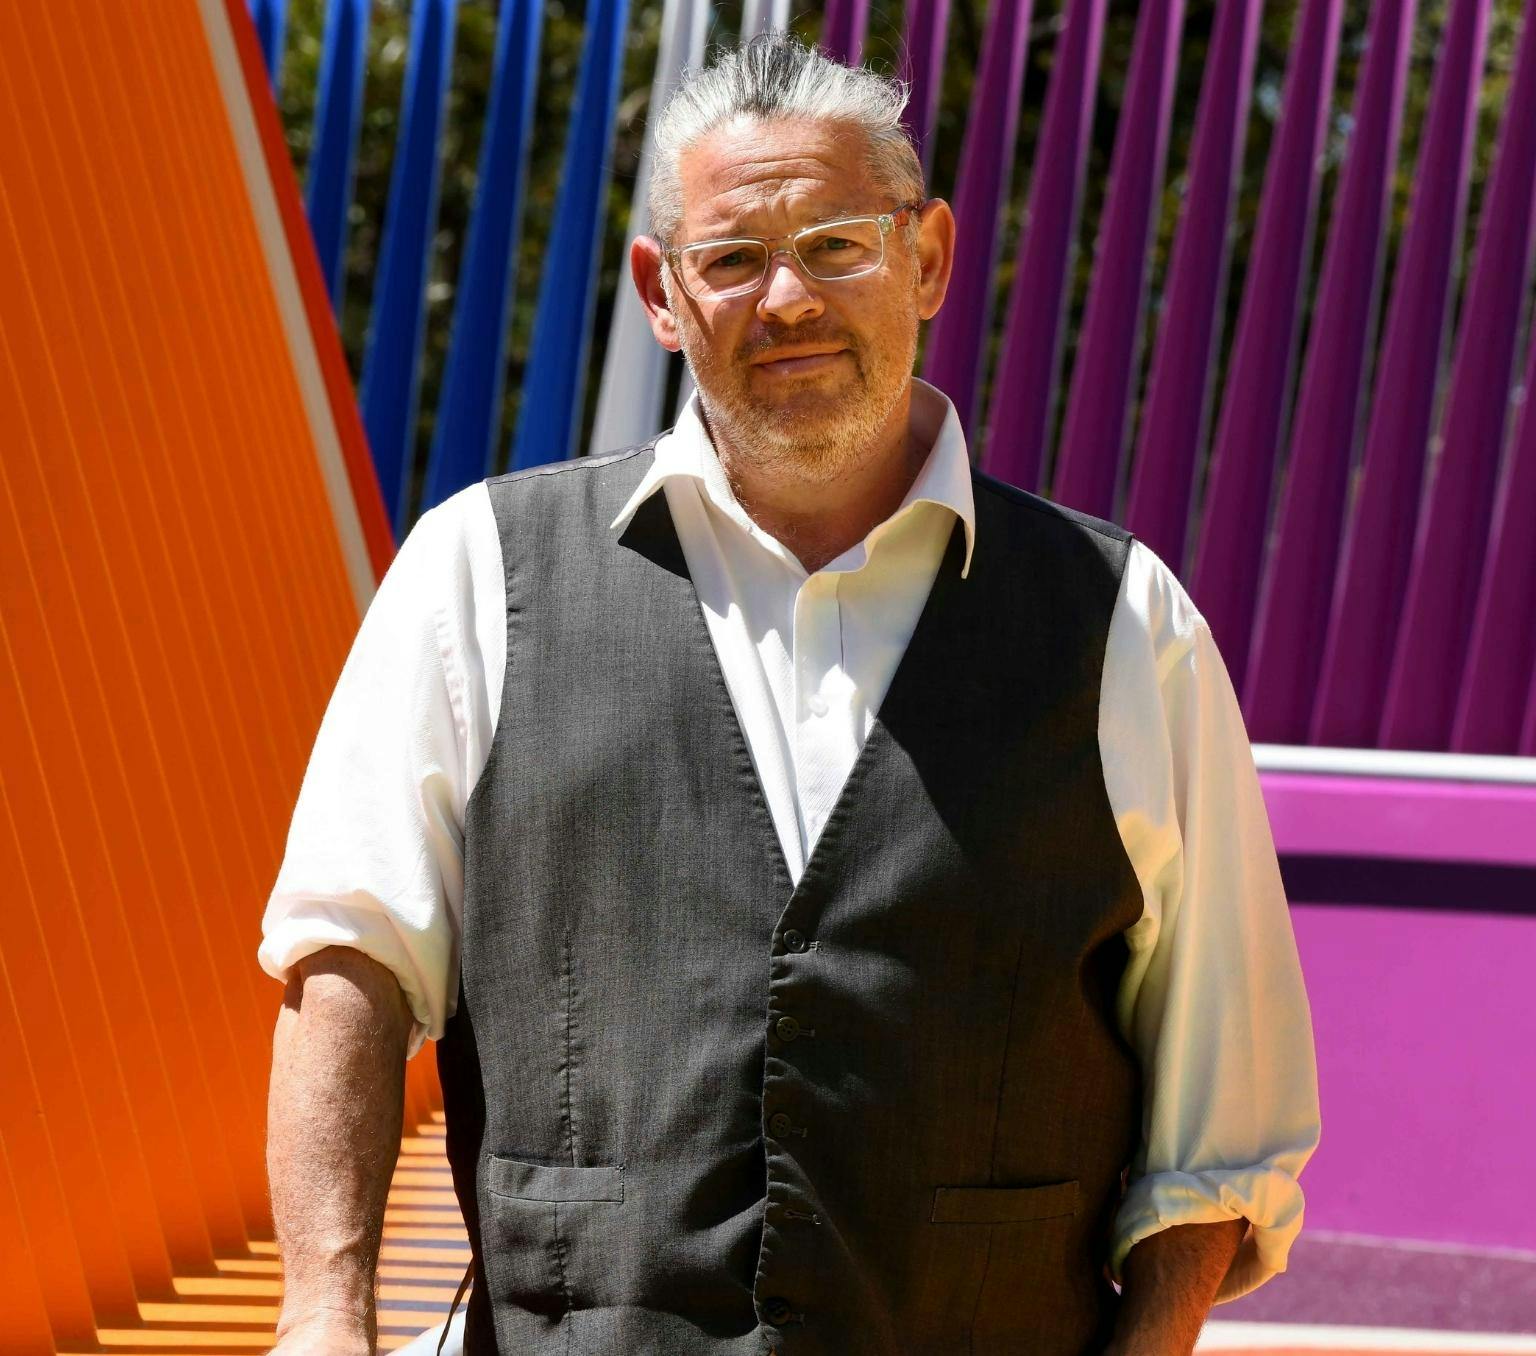 Alex Brown is standing in front of an orange, purple and blue background. He is wearing a white collared shirt and a grey vest.